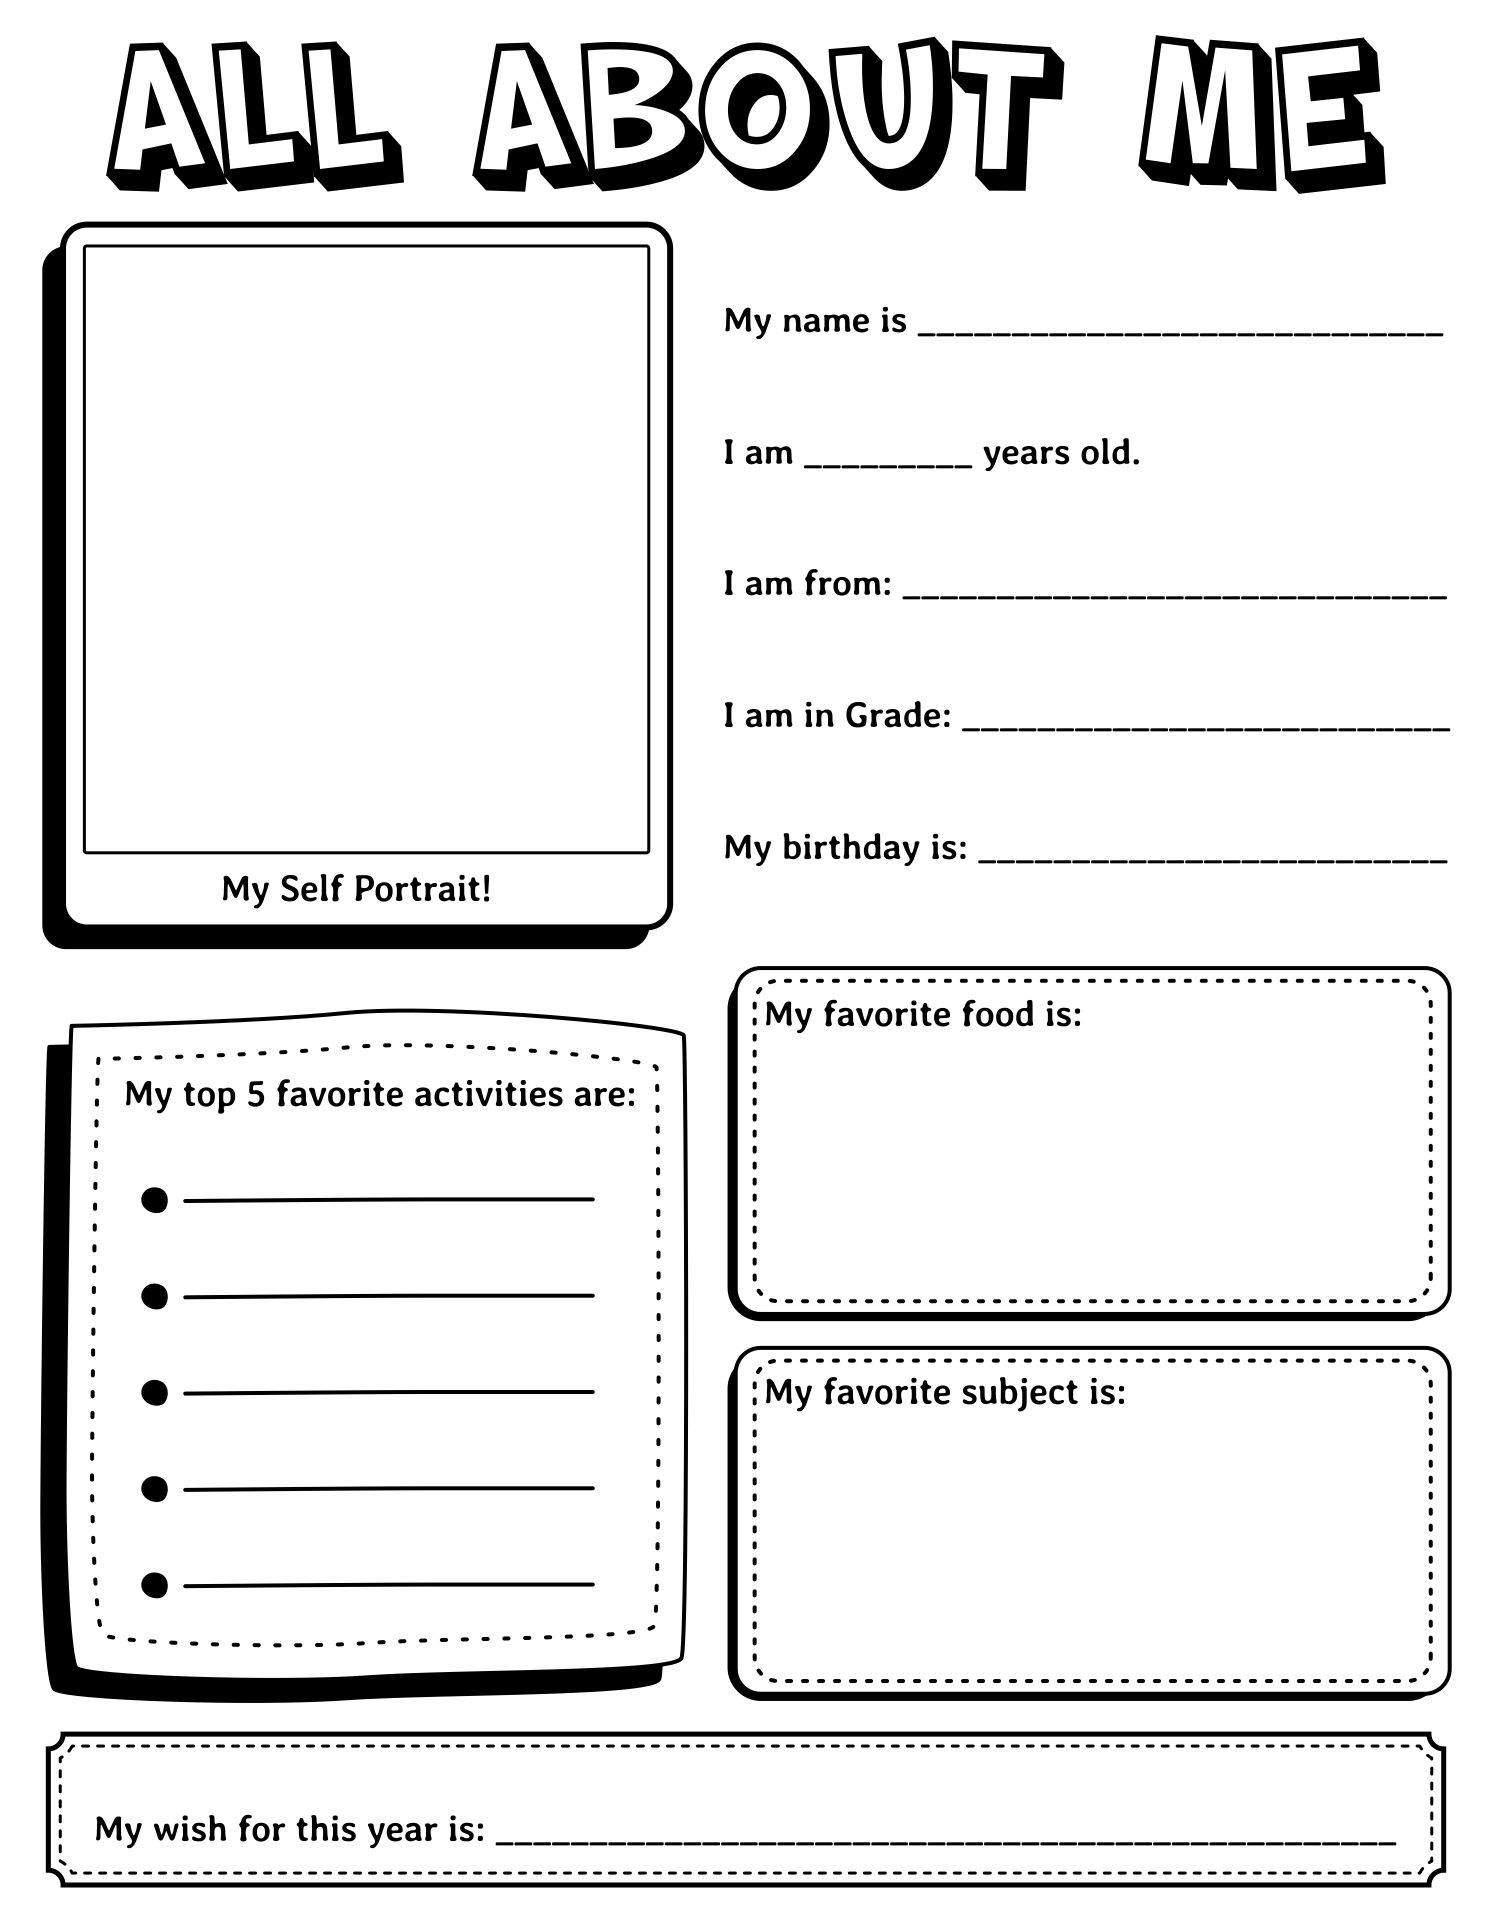 Fill In The Blank All About Me Template For Students